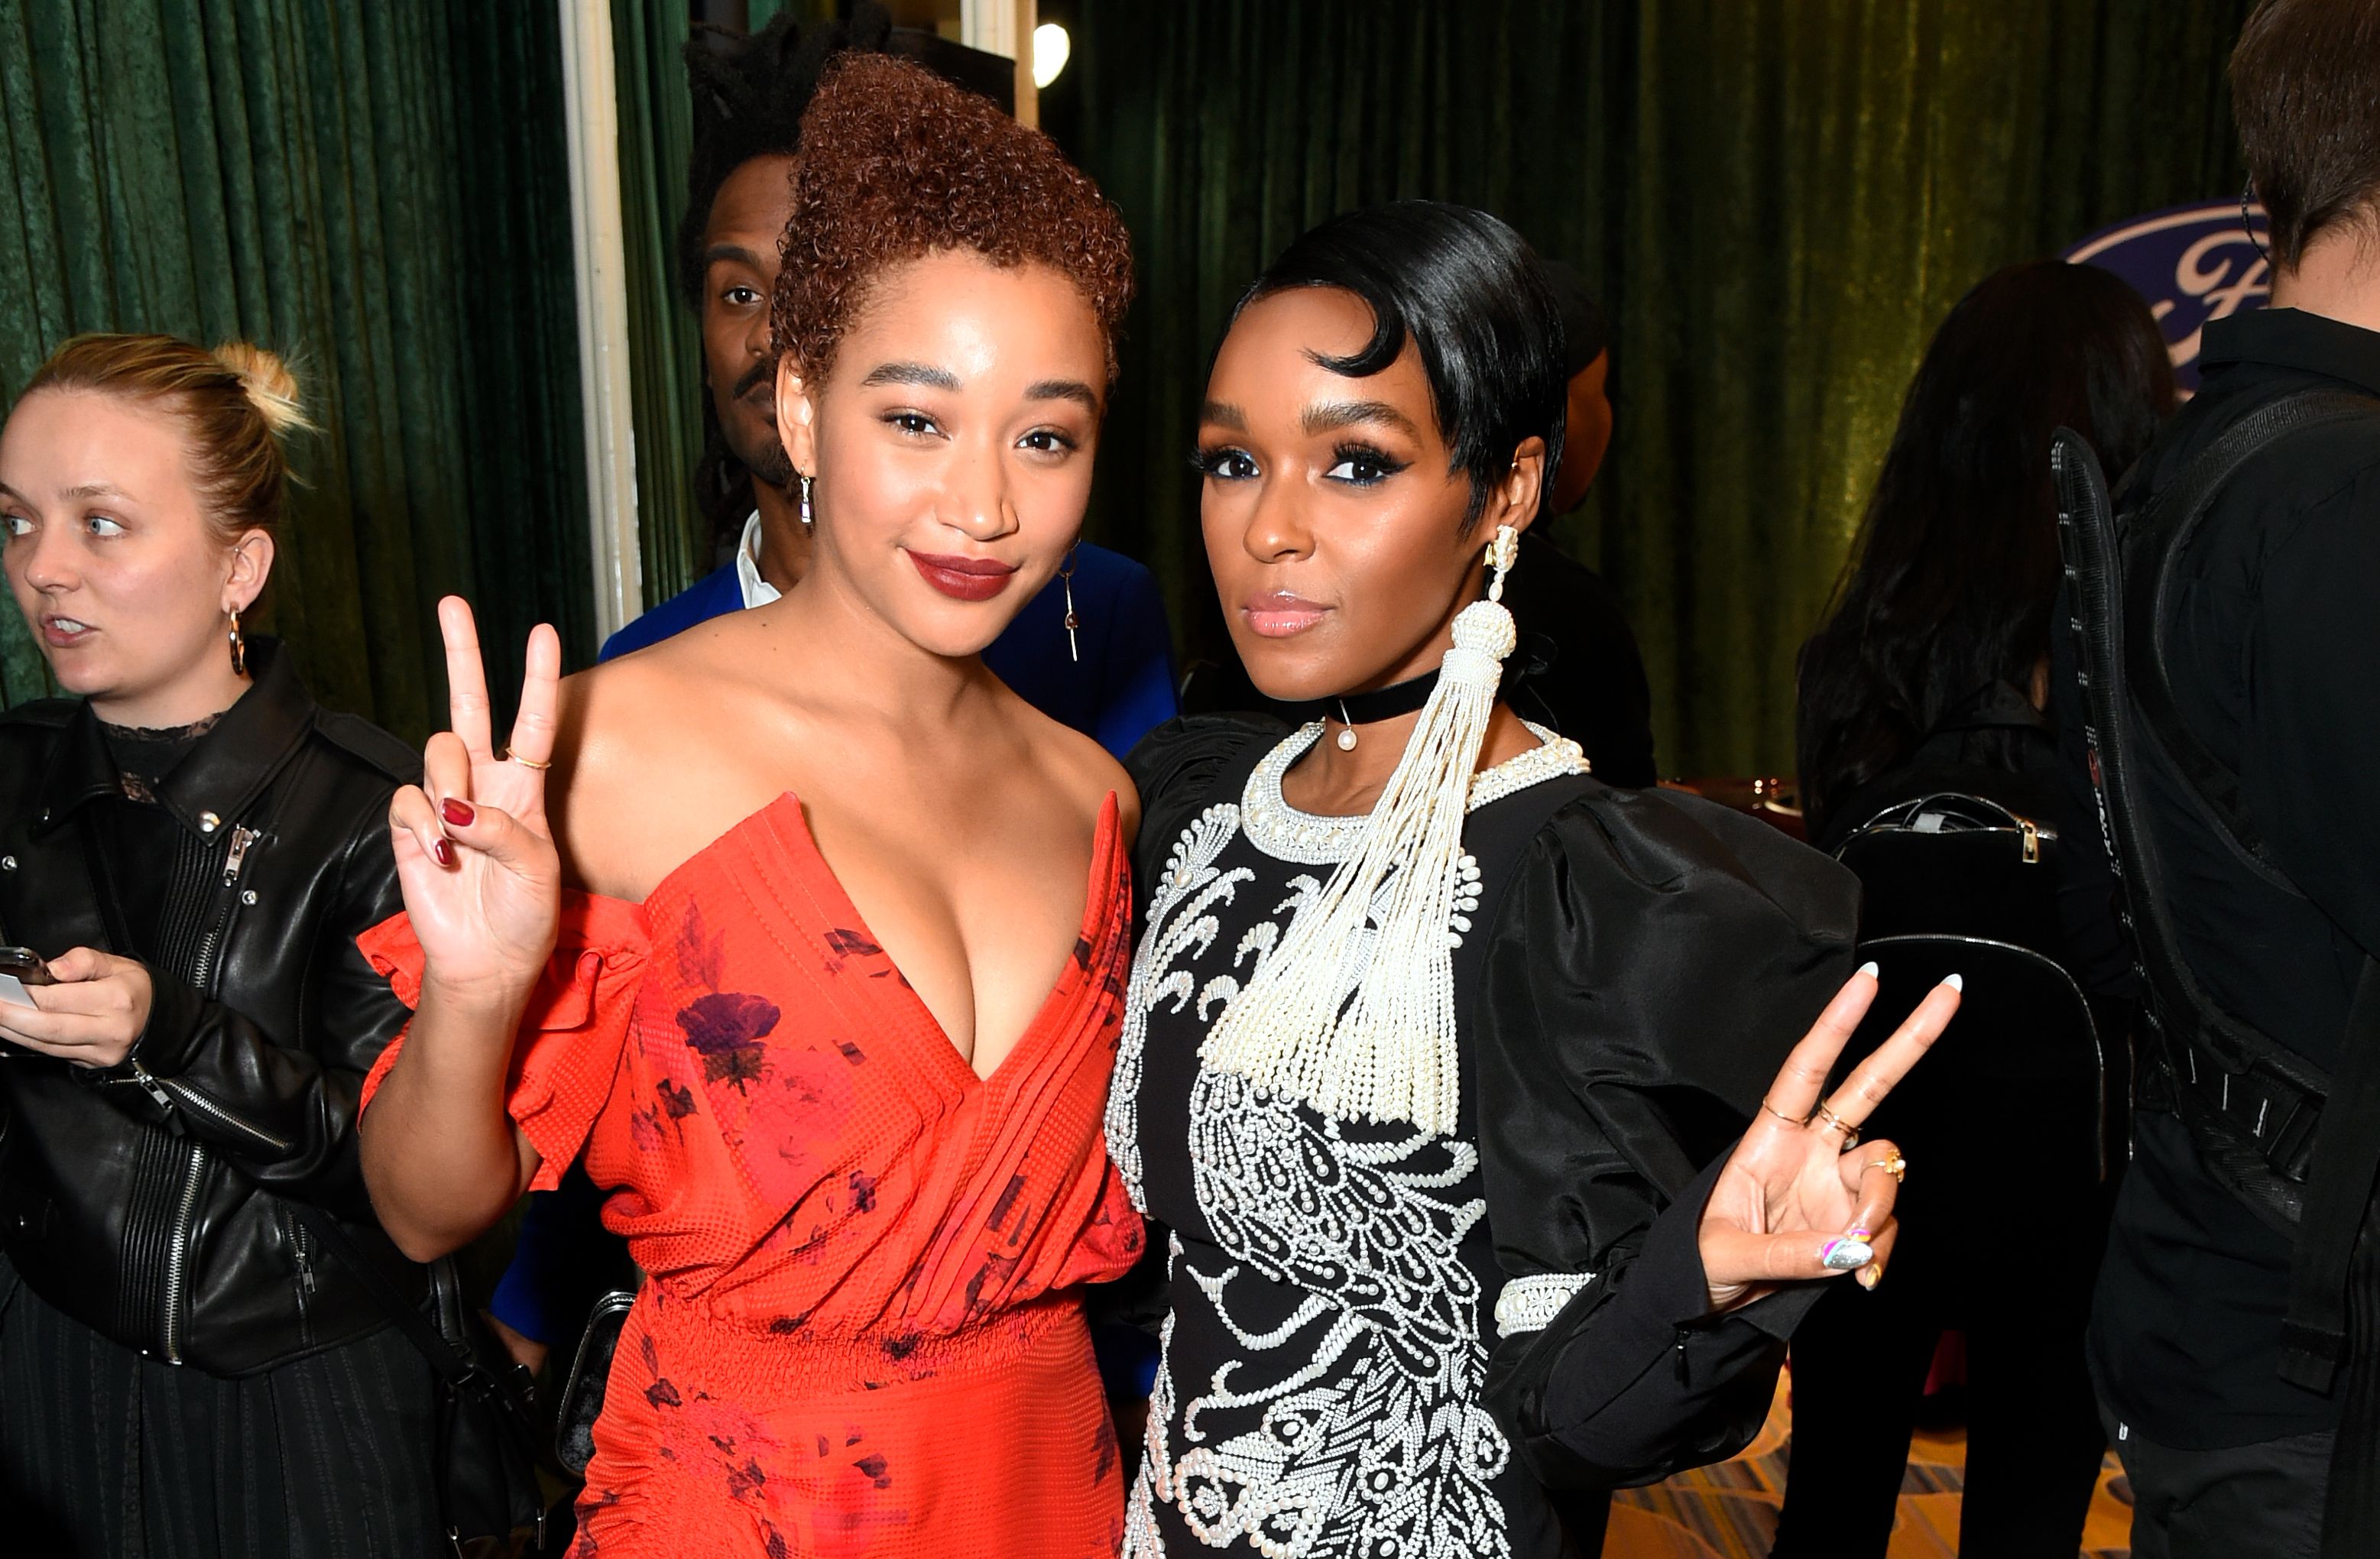 See What It Looked Like Behind The Scenes At The 2018 ESSENCE Black Women In Hollywood Awards
